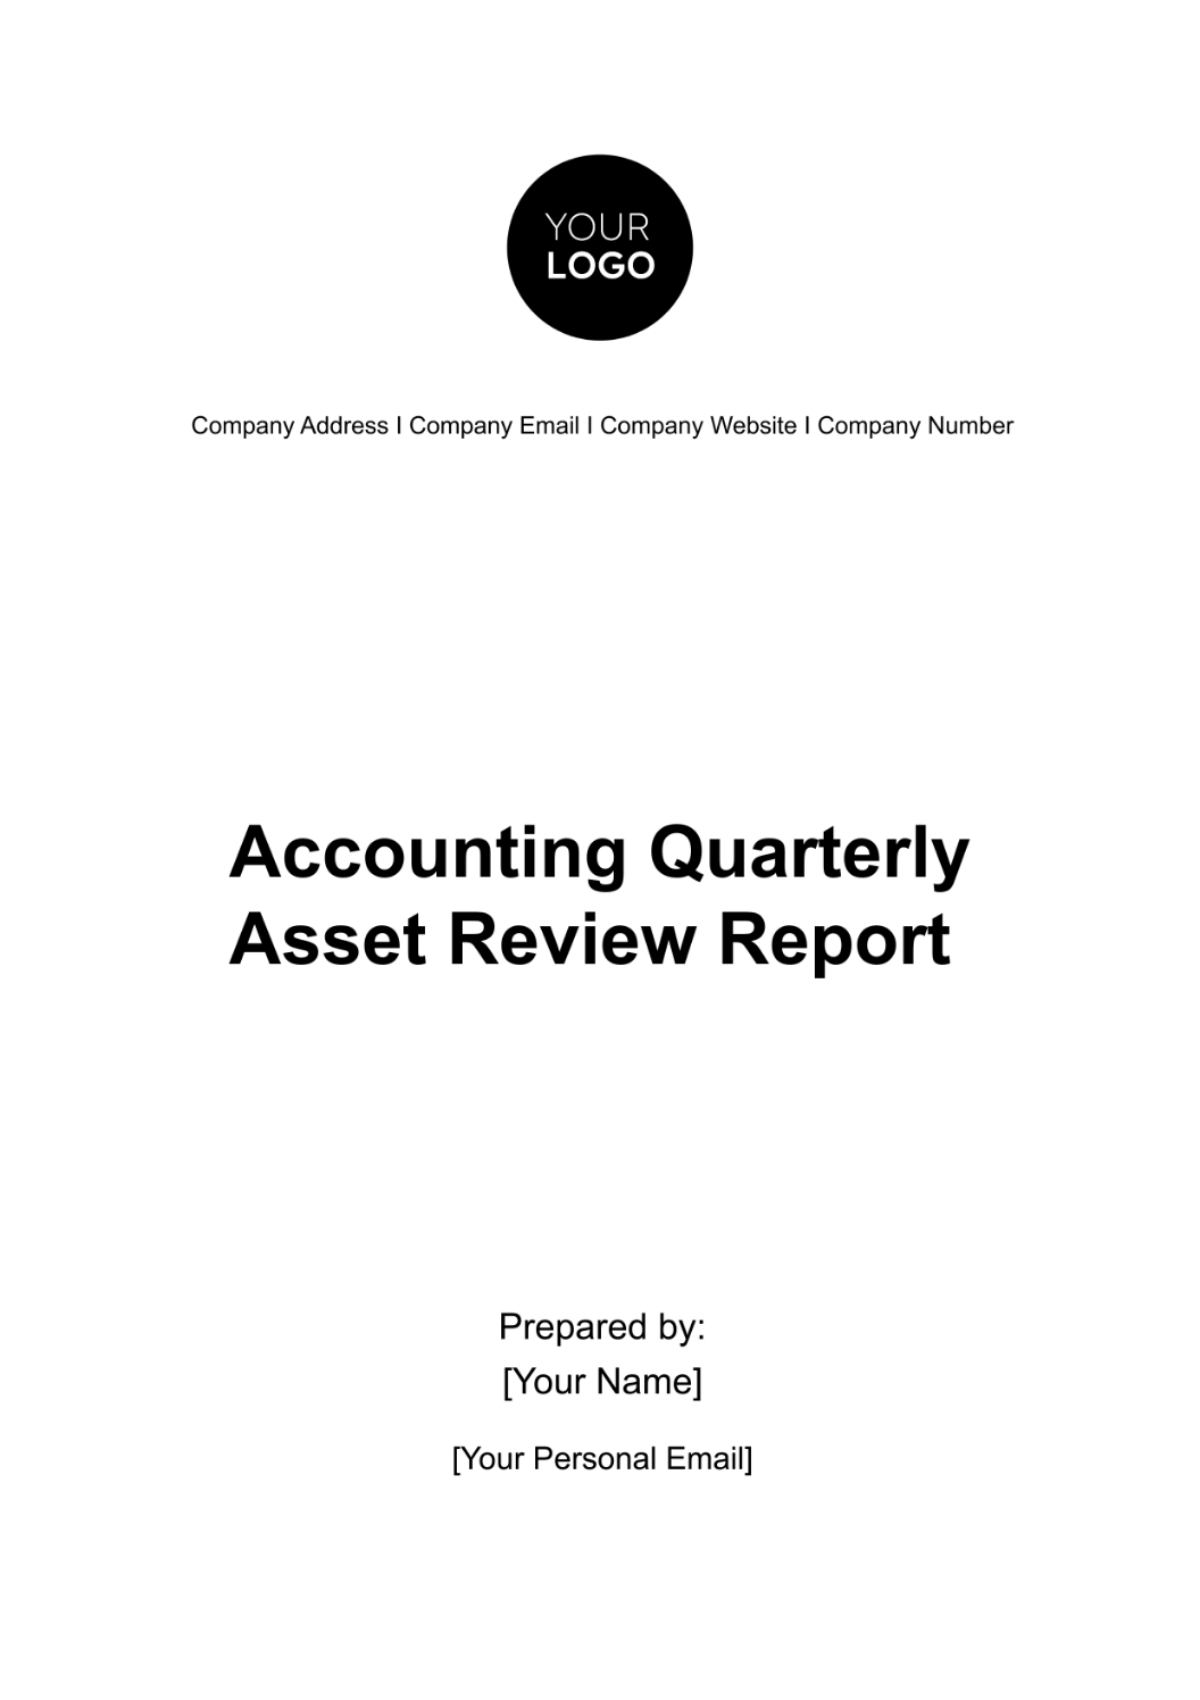 Accounting Quarterly Asset Review Report Template